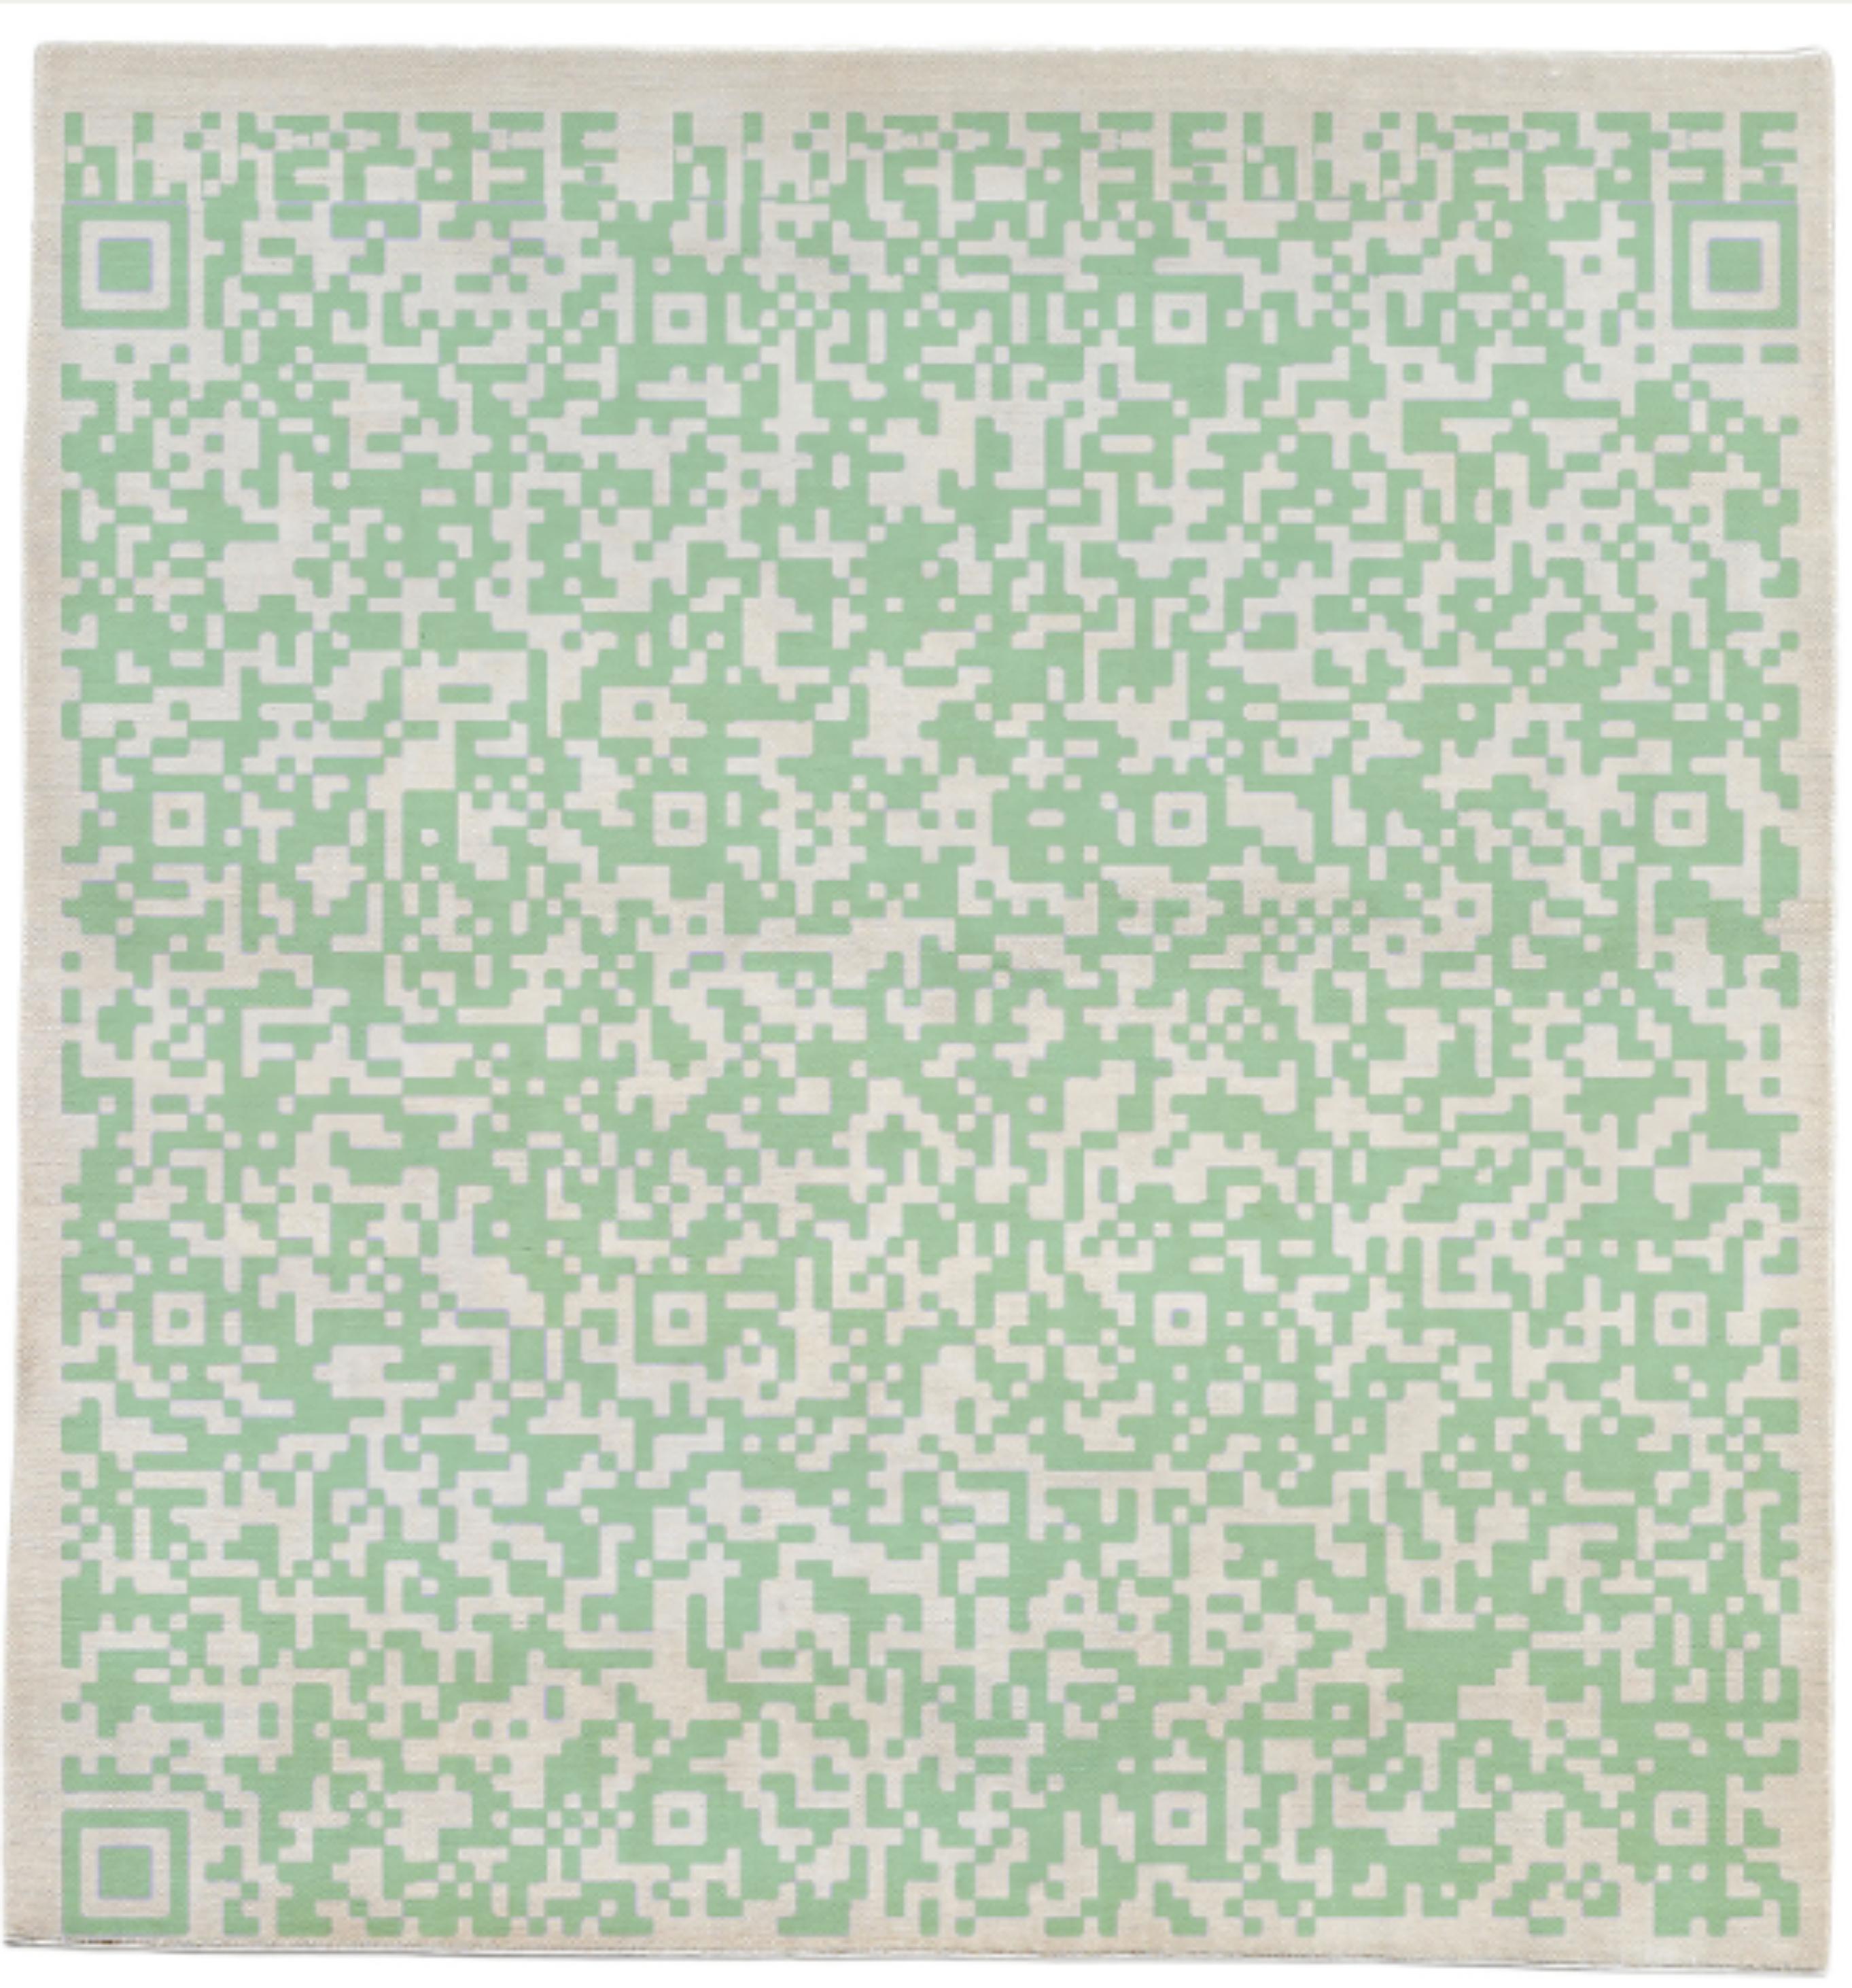 CF BPG1 green Mutation by Caturegli Formica
Dimensions: W 225 x L 240 cm
Materials: Wool

Carpets as deep information

Carpets are very common items. But it has never really been clear if their decorations, so confidently woven and